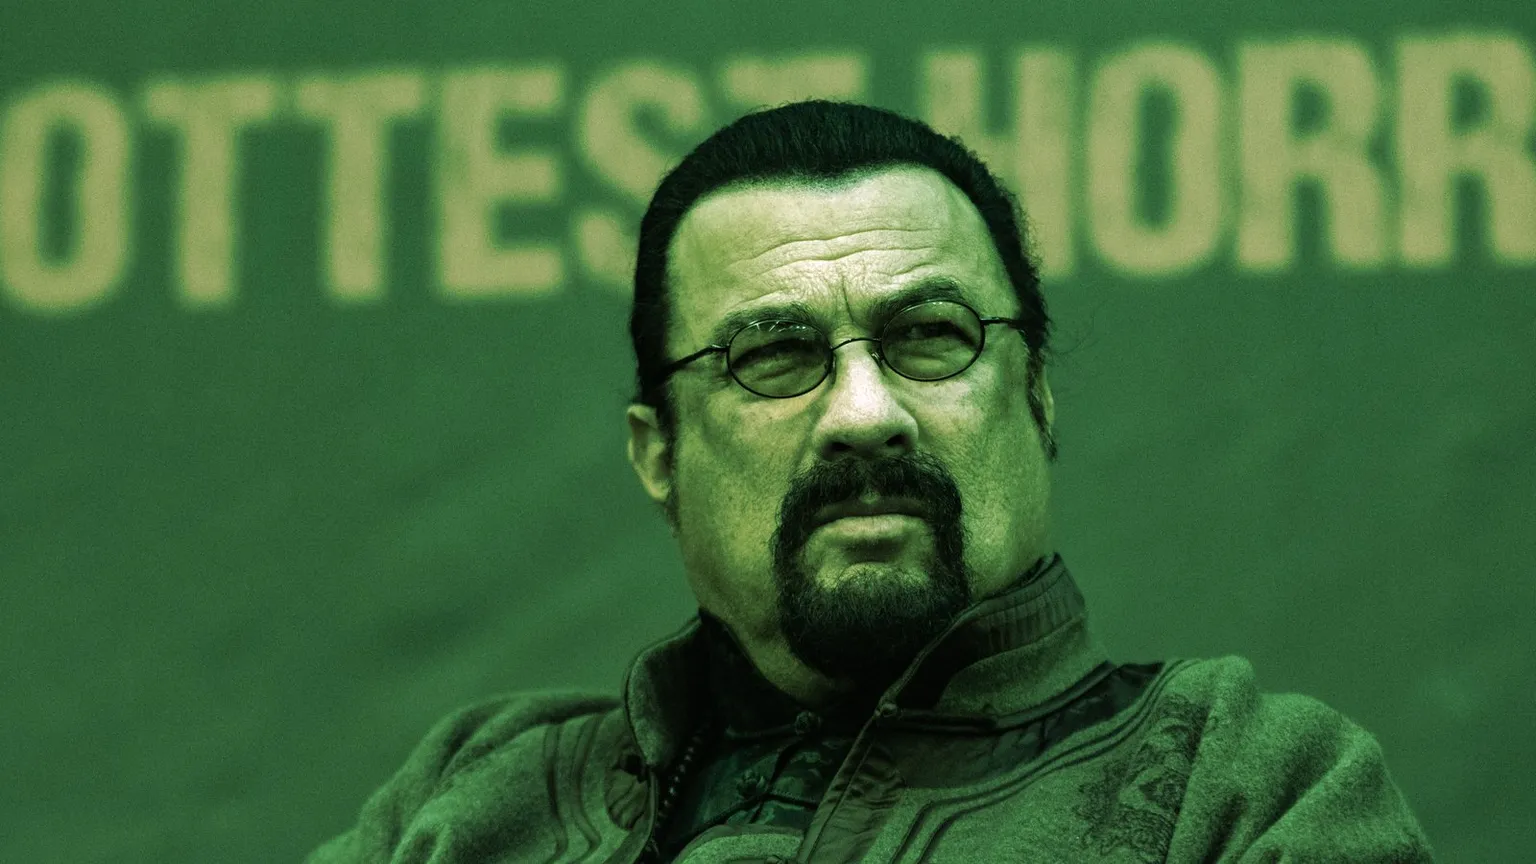 Steven Seagal is an actor and martial artist. Image: Shutterstock